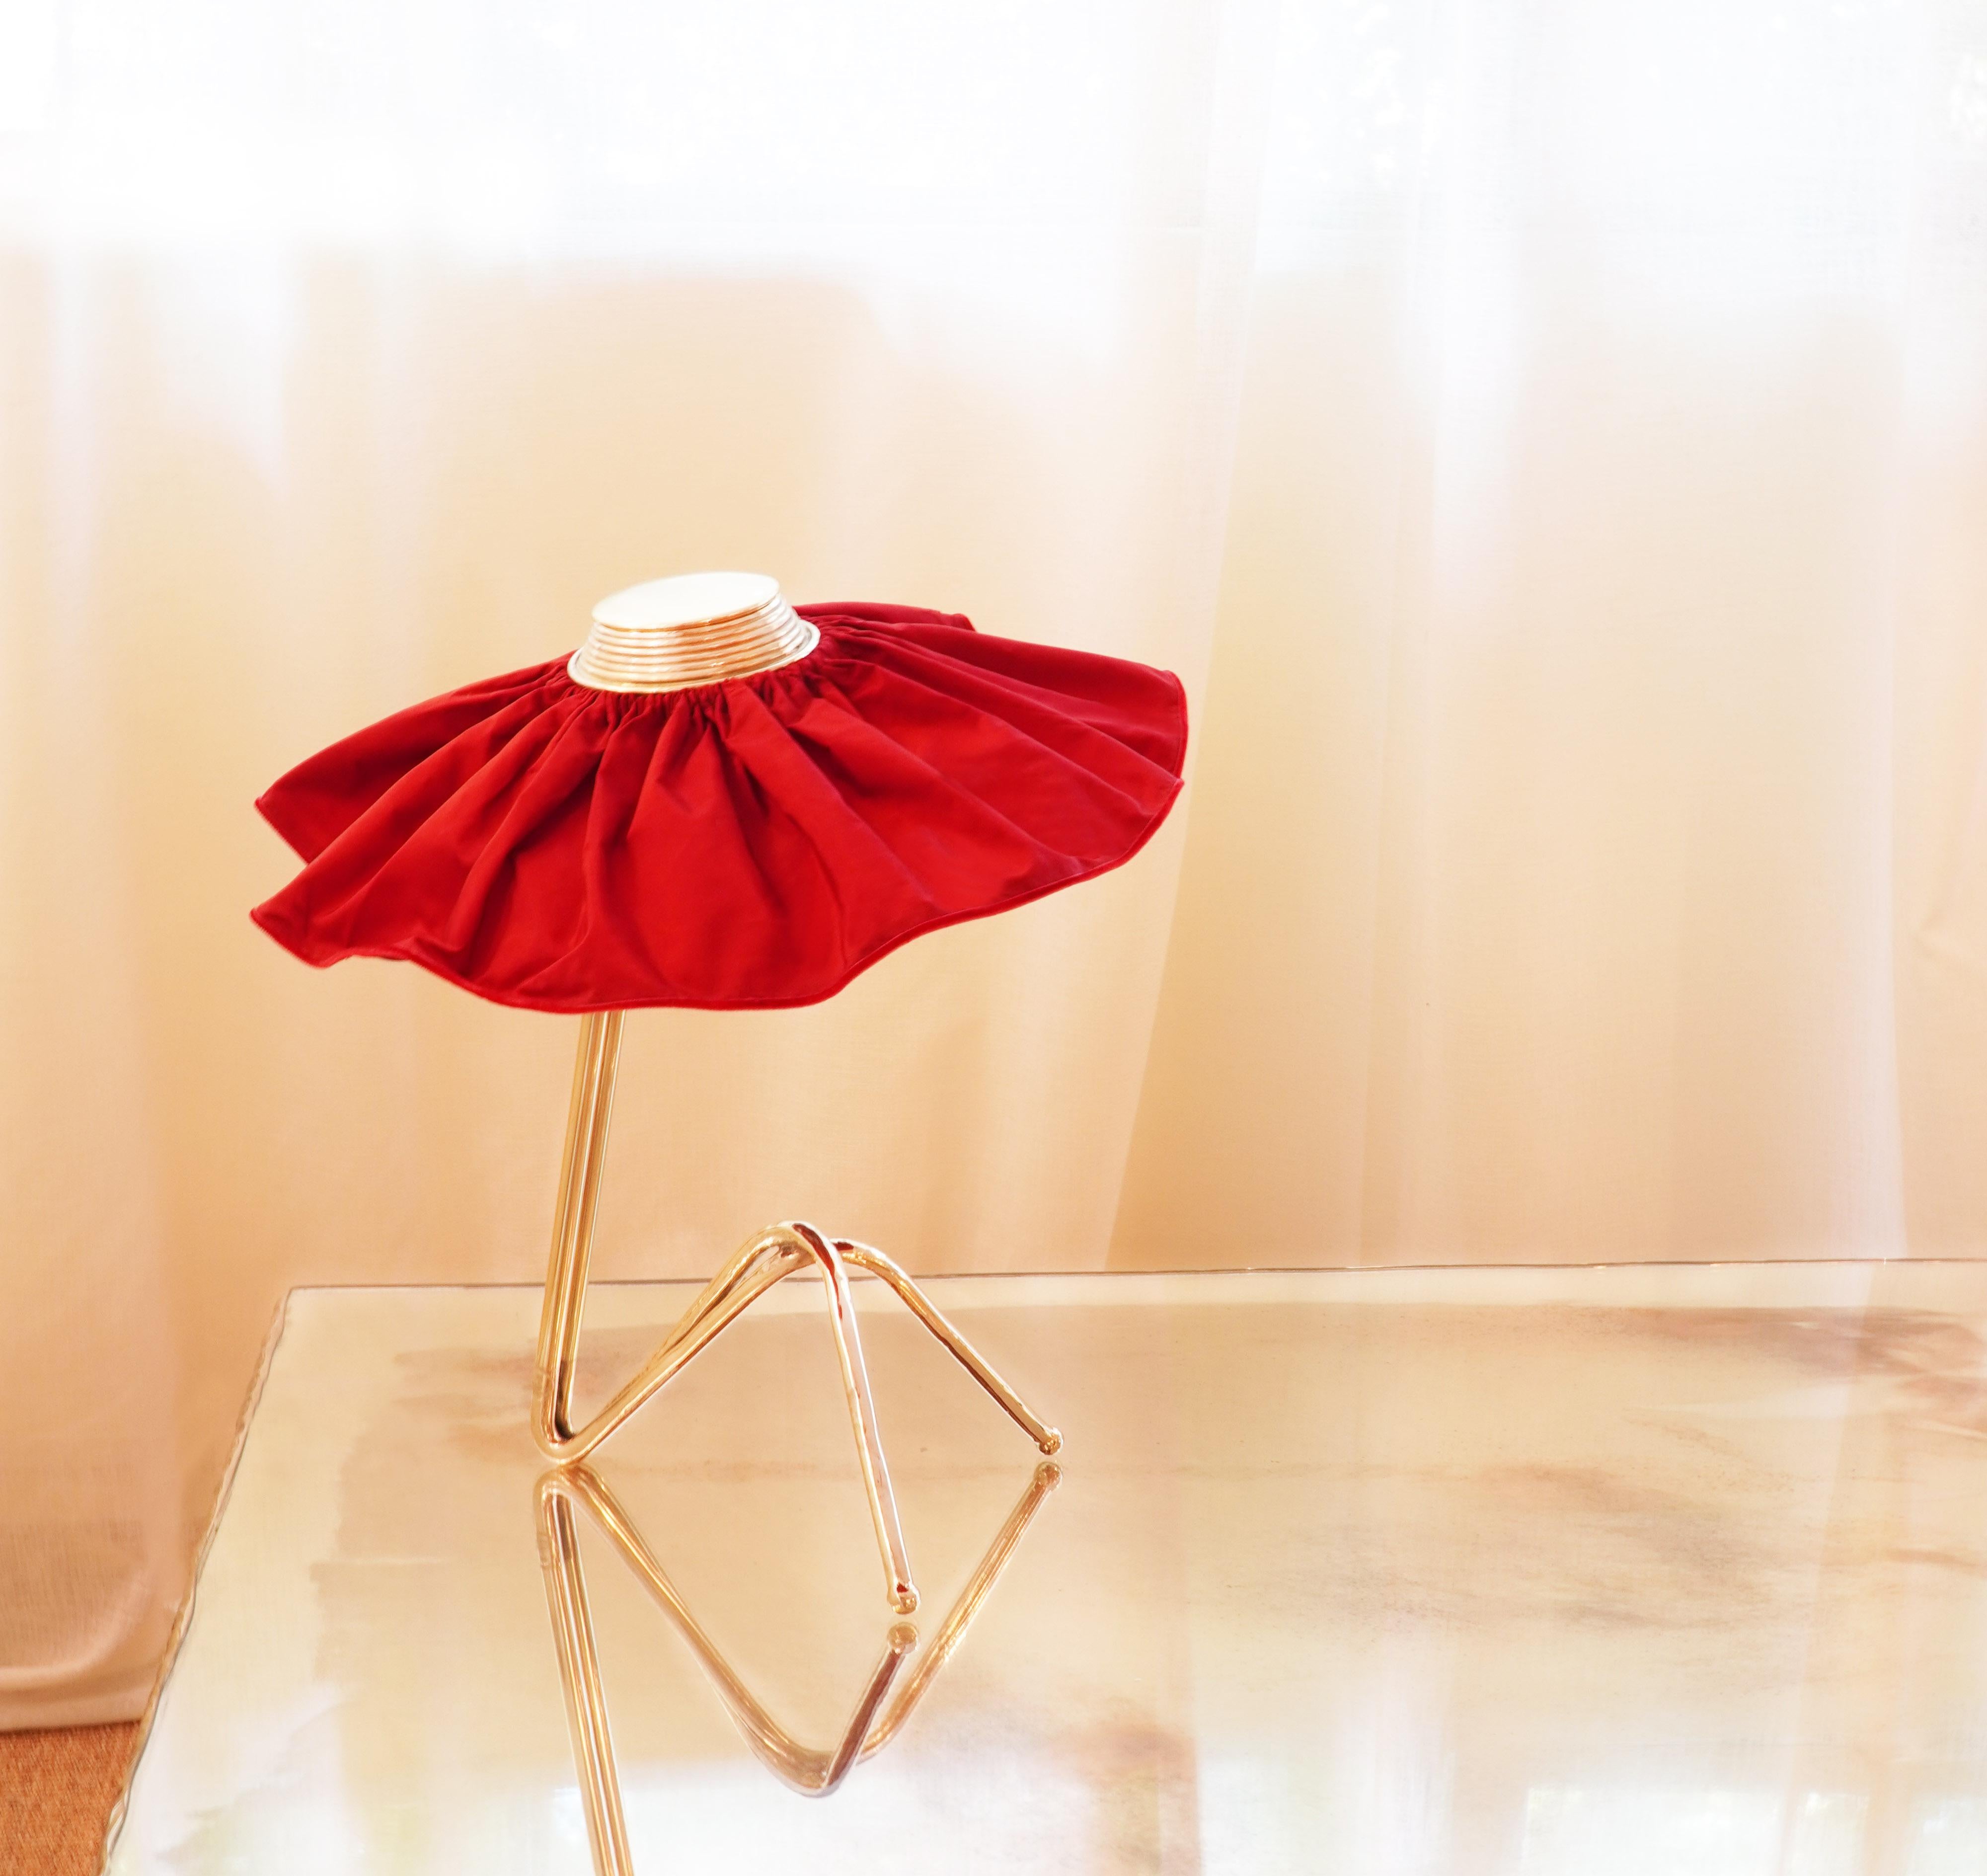 Freevolle Sculpture Table Lamp, cast melted Brass Body, red passion Taffeta 1